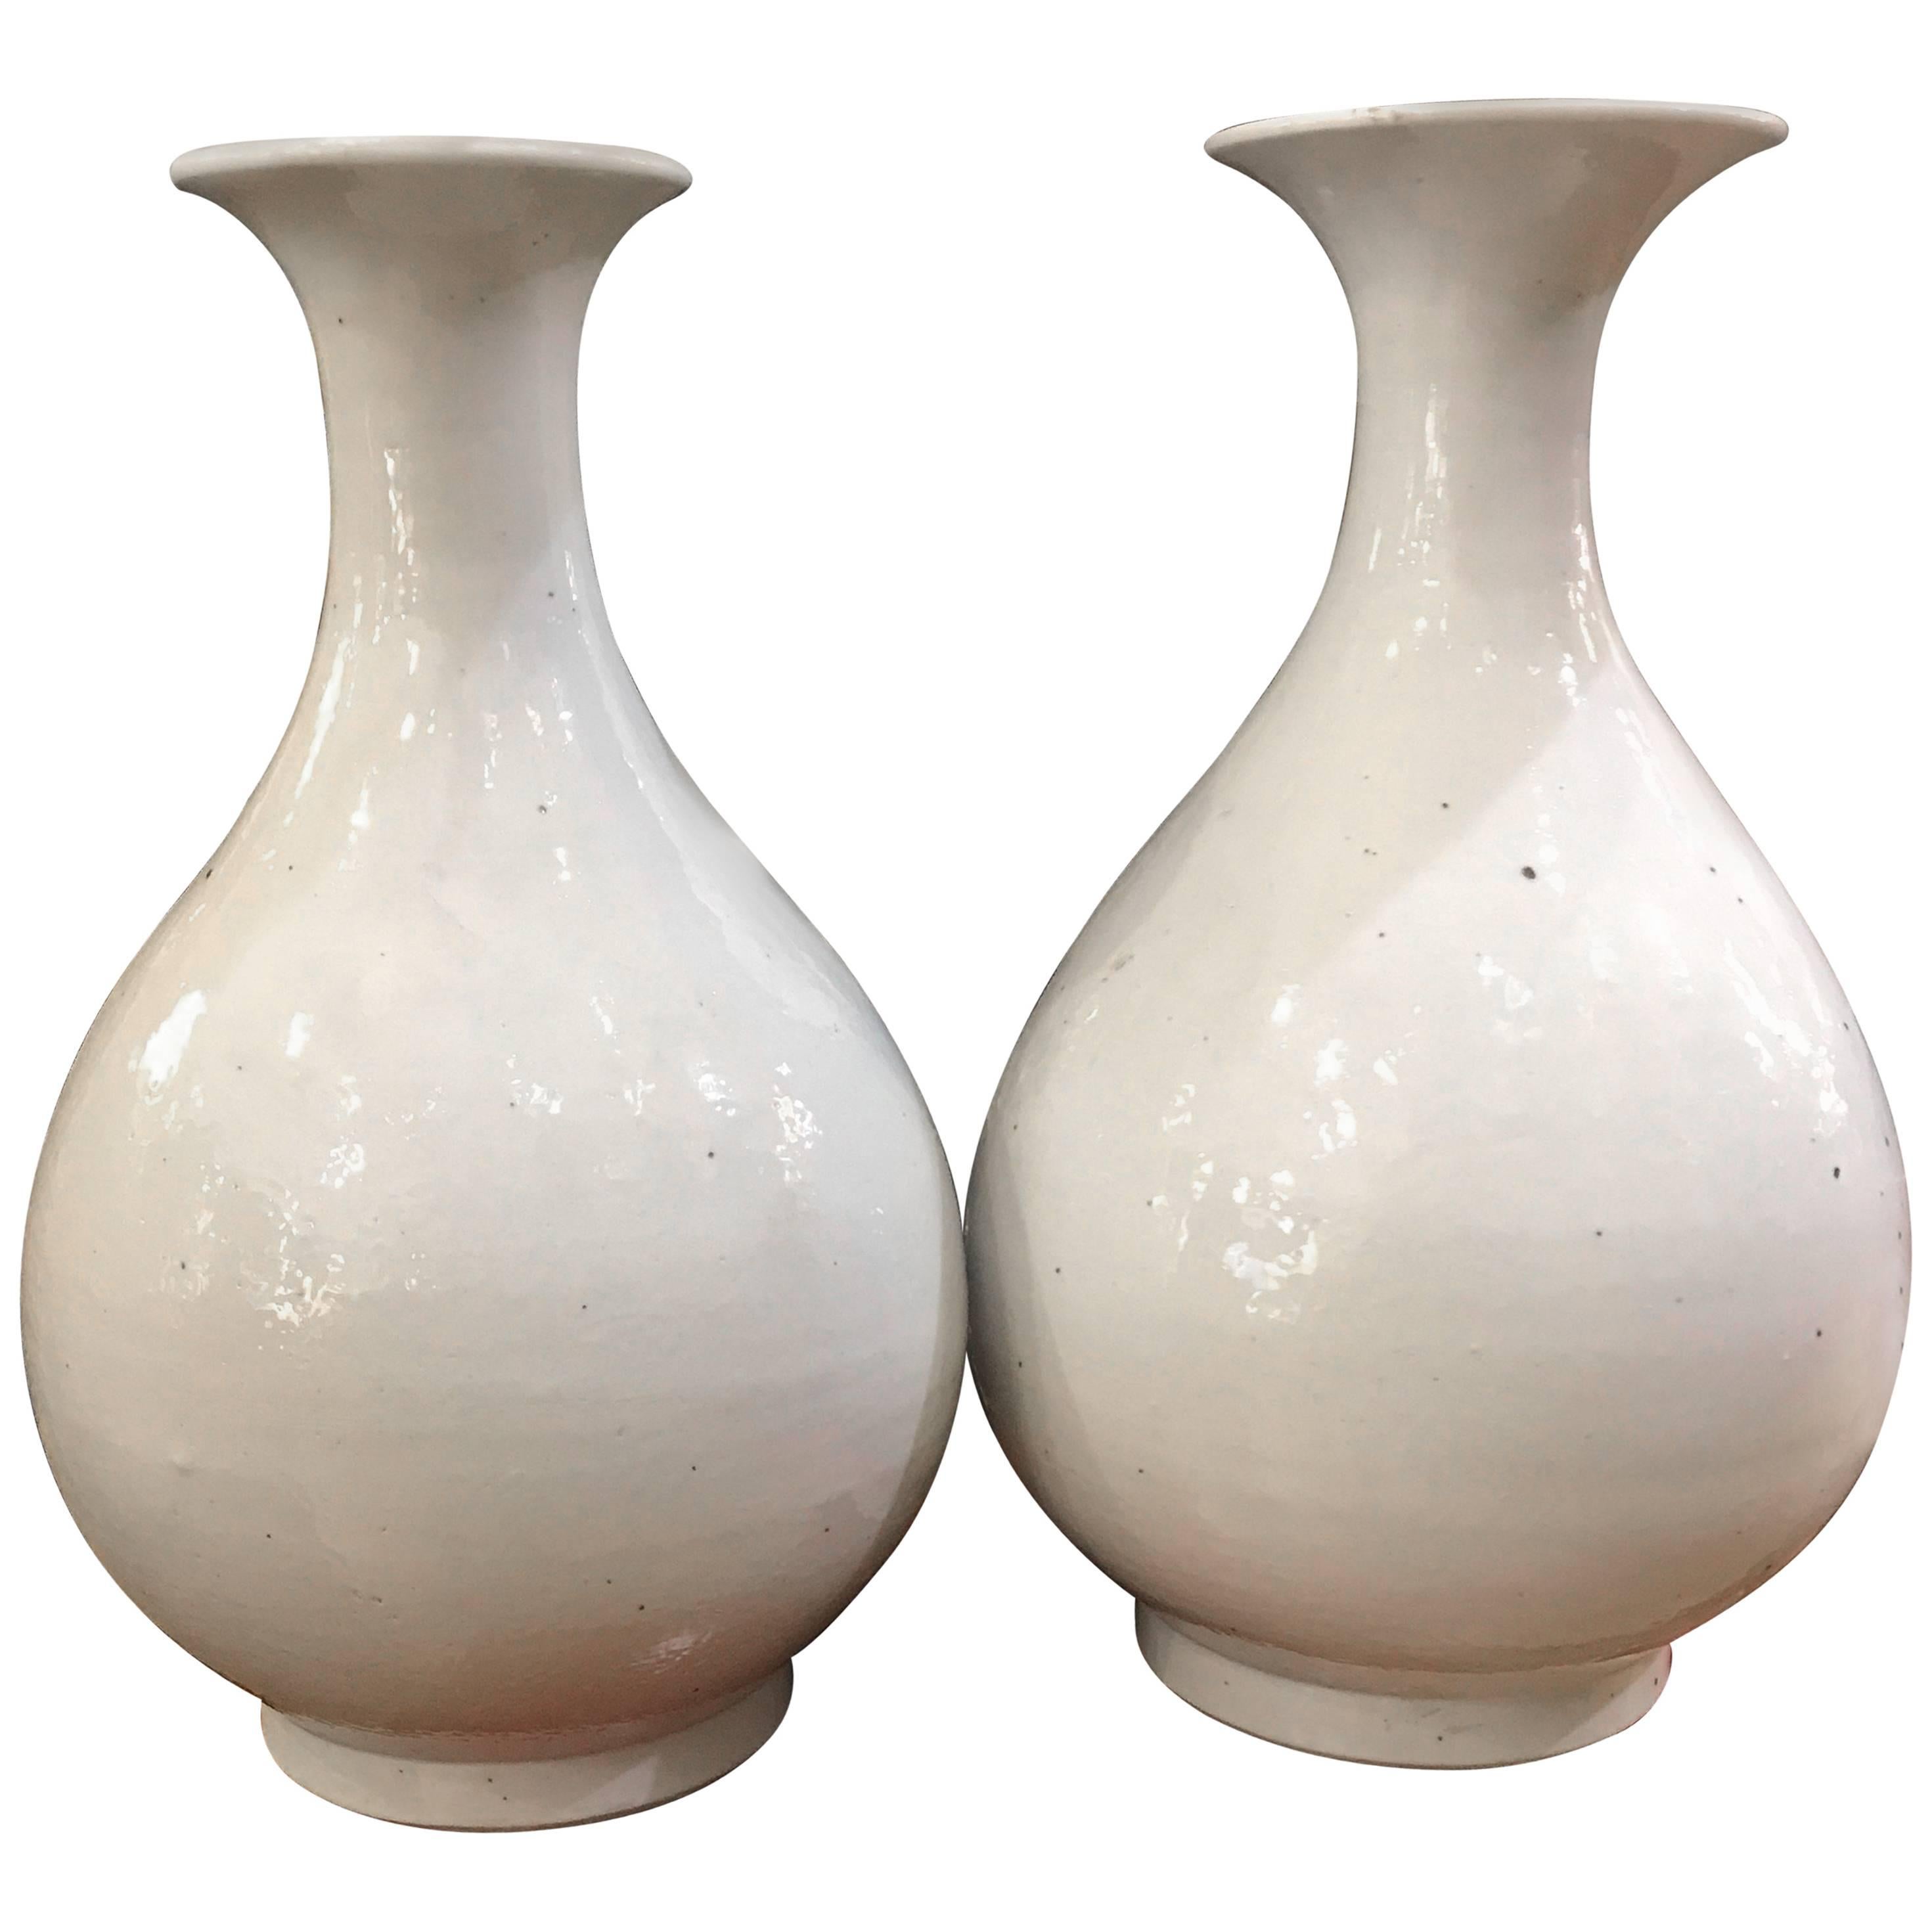 Pair of Contemporary Porcelain Tear Drop Shaped Vases